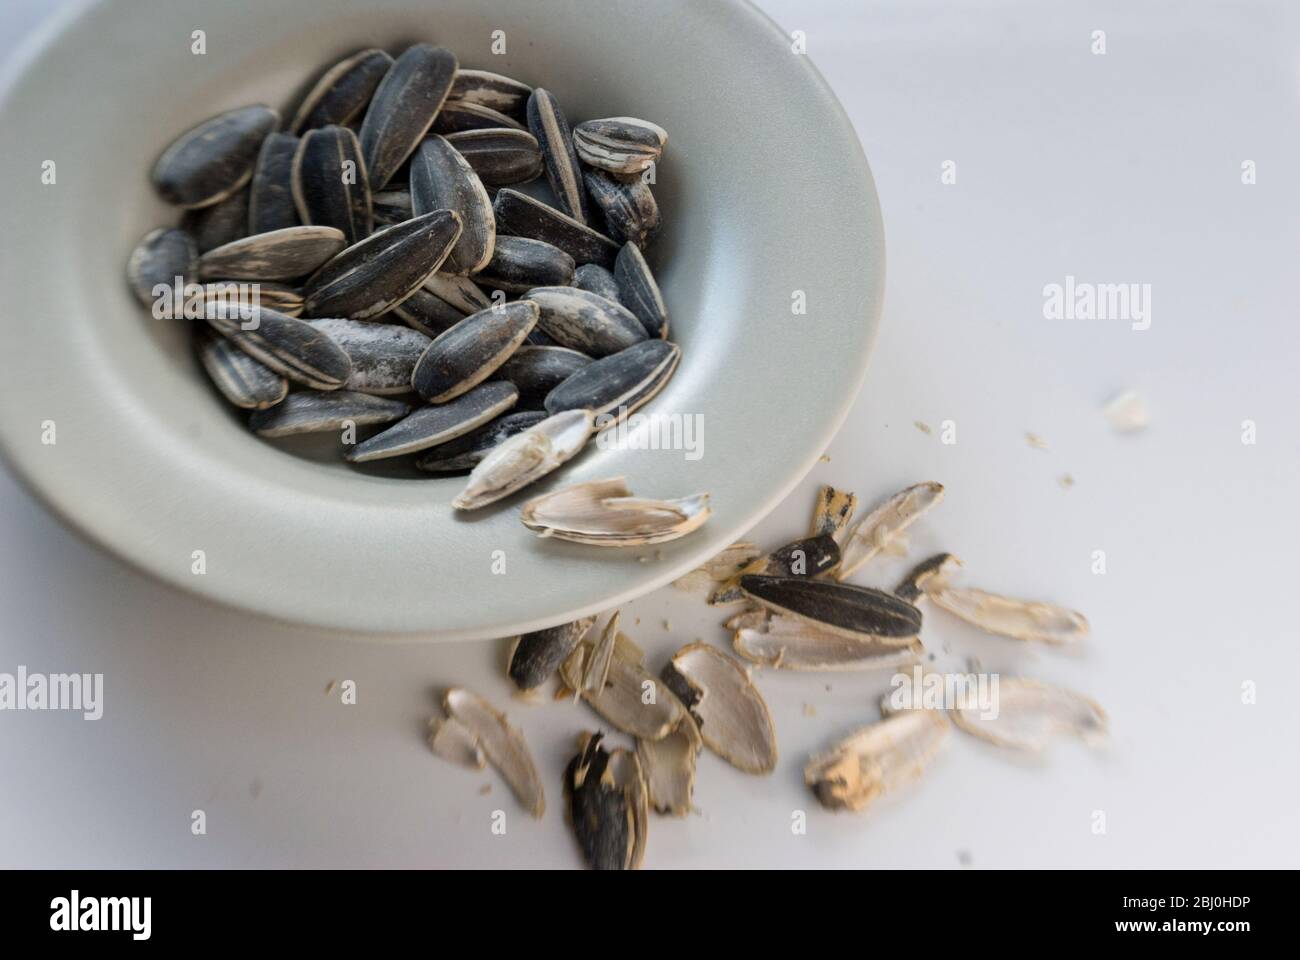 Toasted and salted sunflower seeds as a snack and to have with drinks - Stock Photo